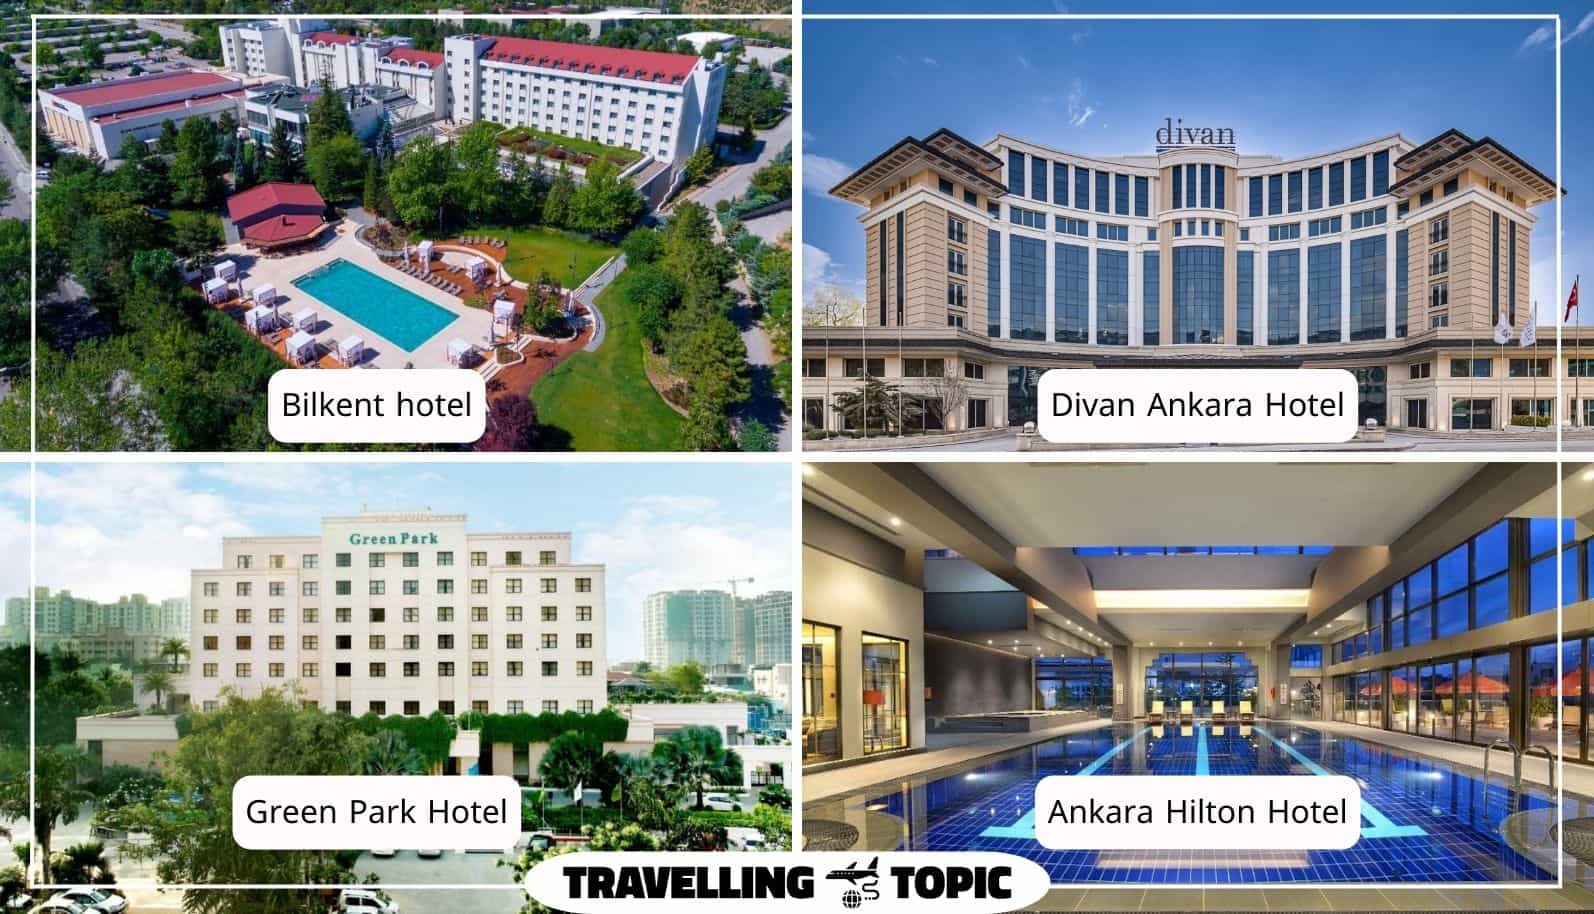 The best hotels in the capital city of Turkey